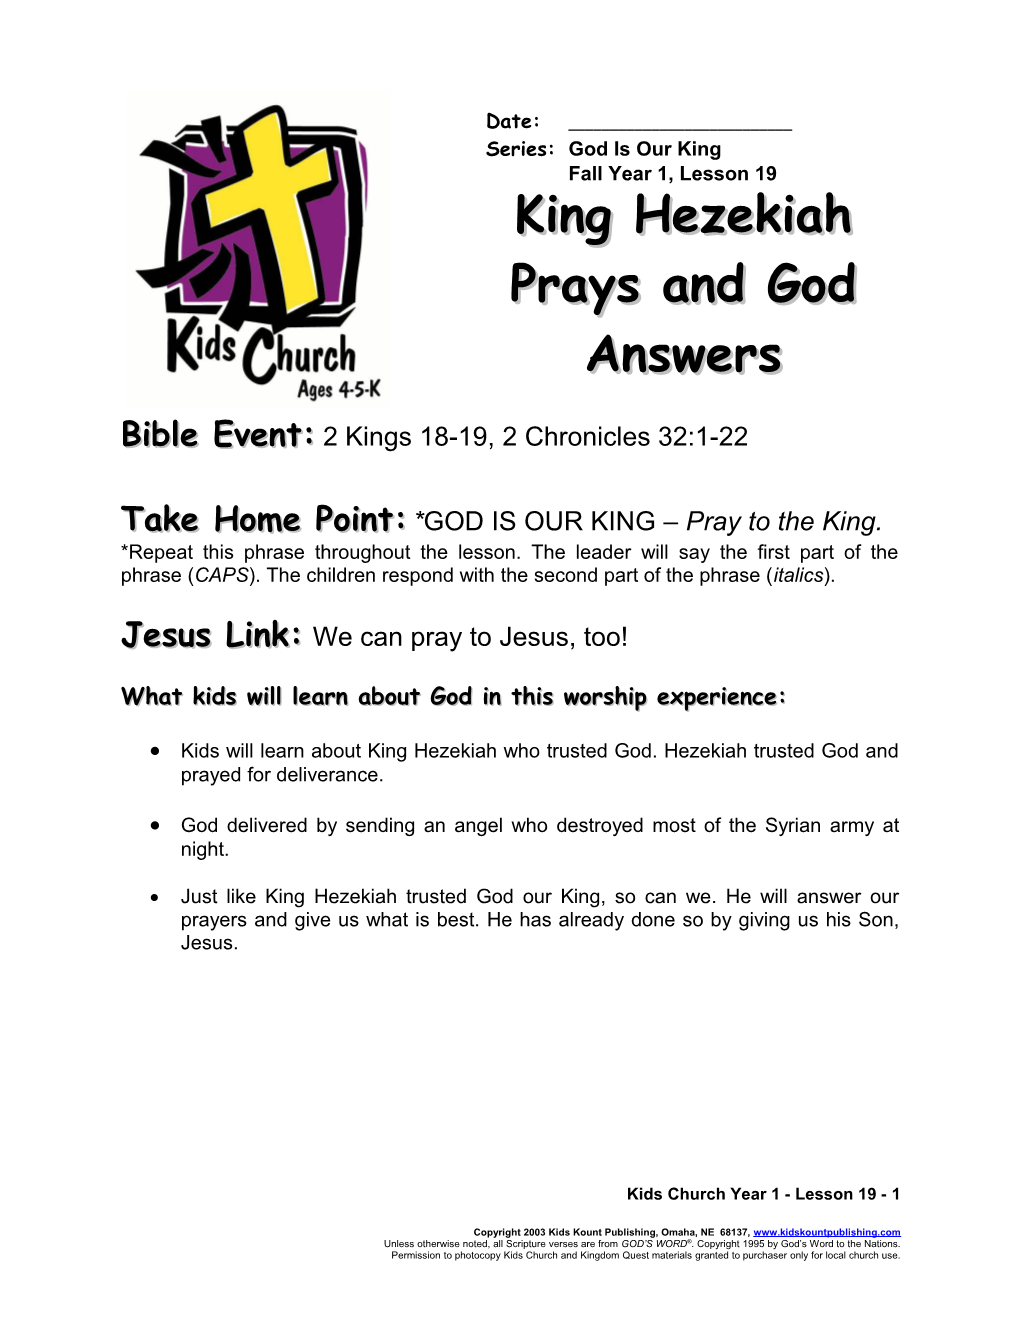 Bible Event:2 Kings 18-19, 2 Chronicles 32:1-22